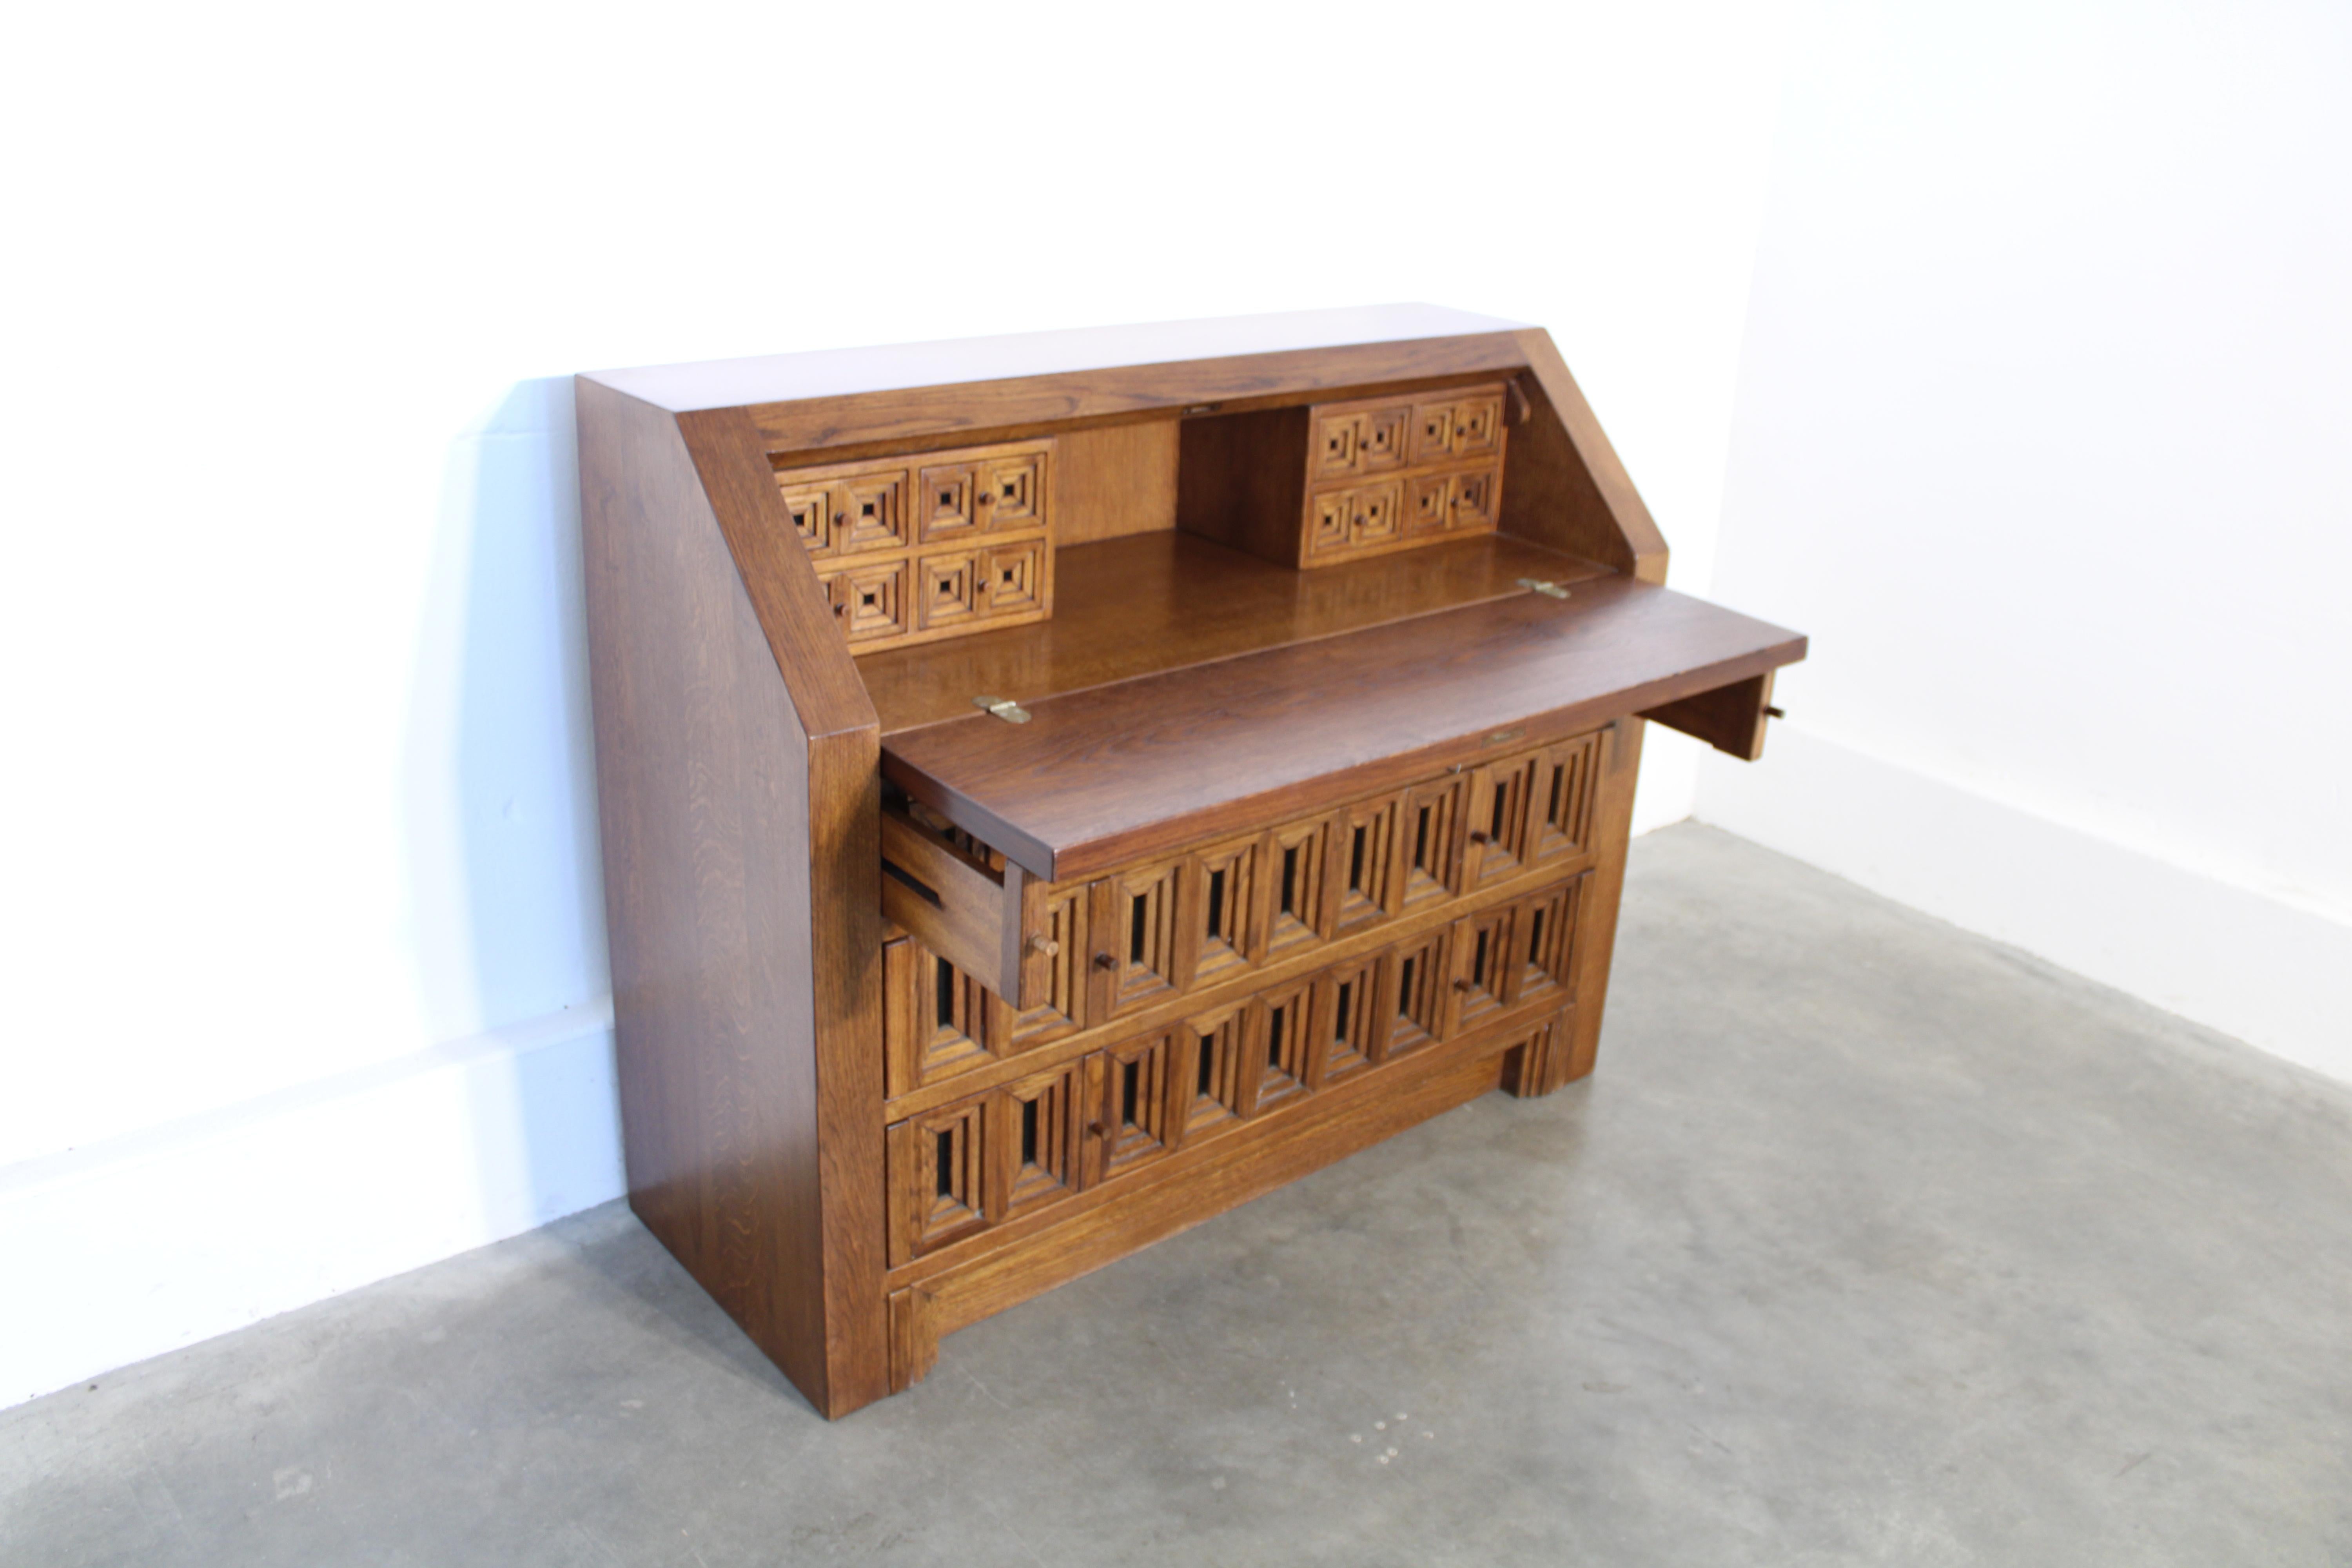 Walnut-stained oak secretaire made in the 1980s by Giuseppe Rivadossi for Officine Rivadossi.
The piece of furniture is in excellent aesthetic and functional condition.
The measurements are: Height 106cm - Length 131 - Depth when closed 53cm -